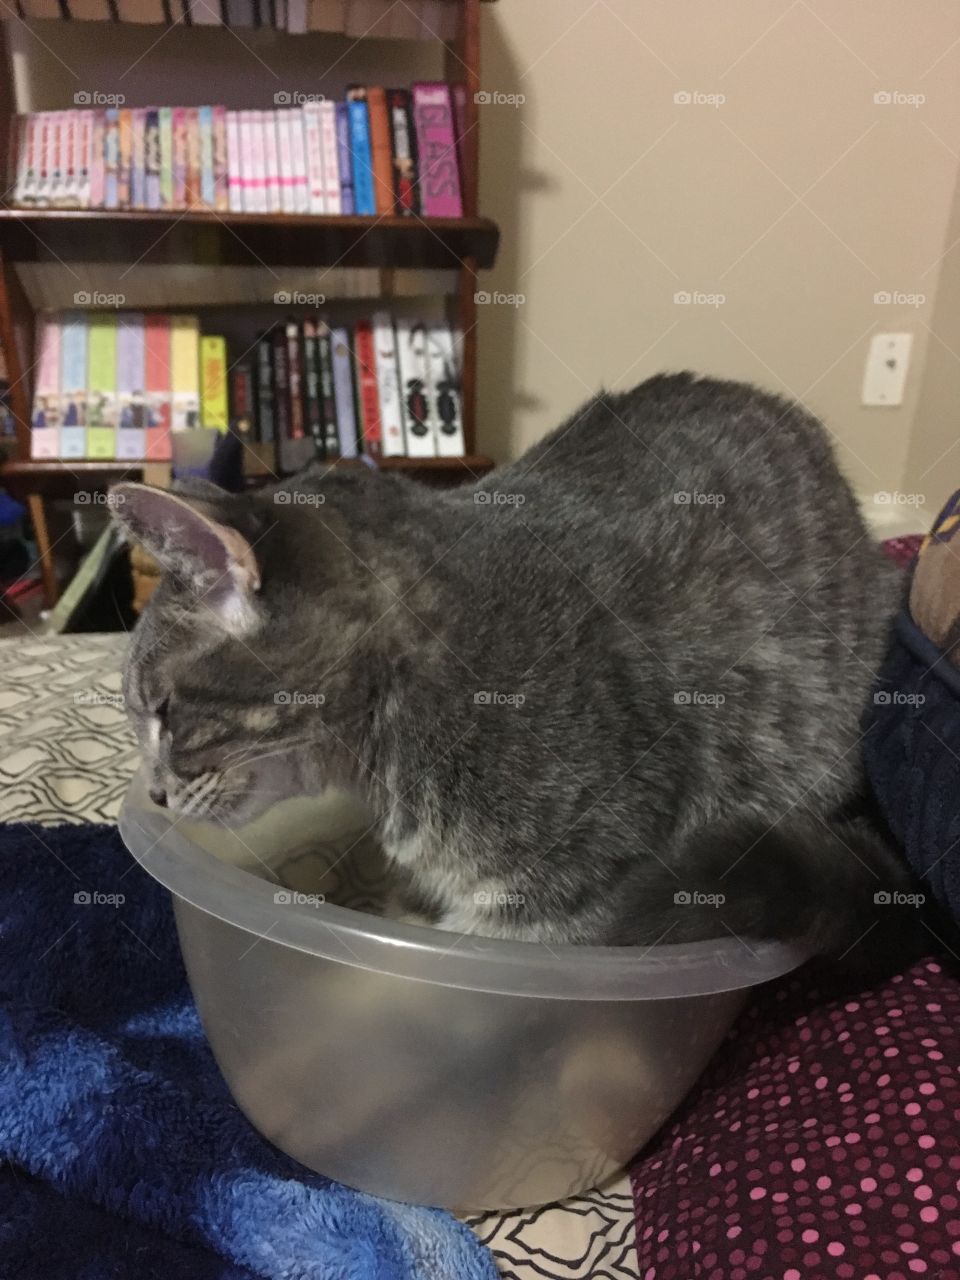 I sit in this bowl
